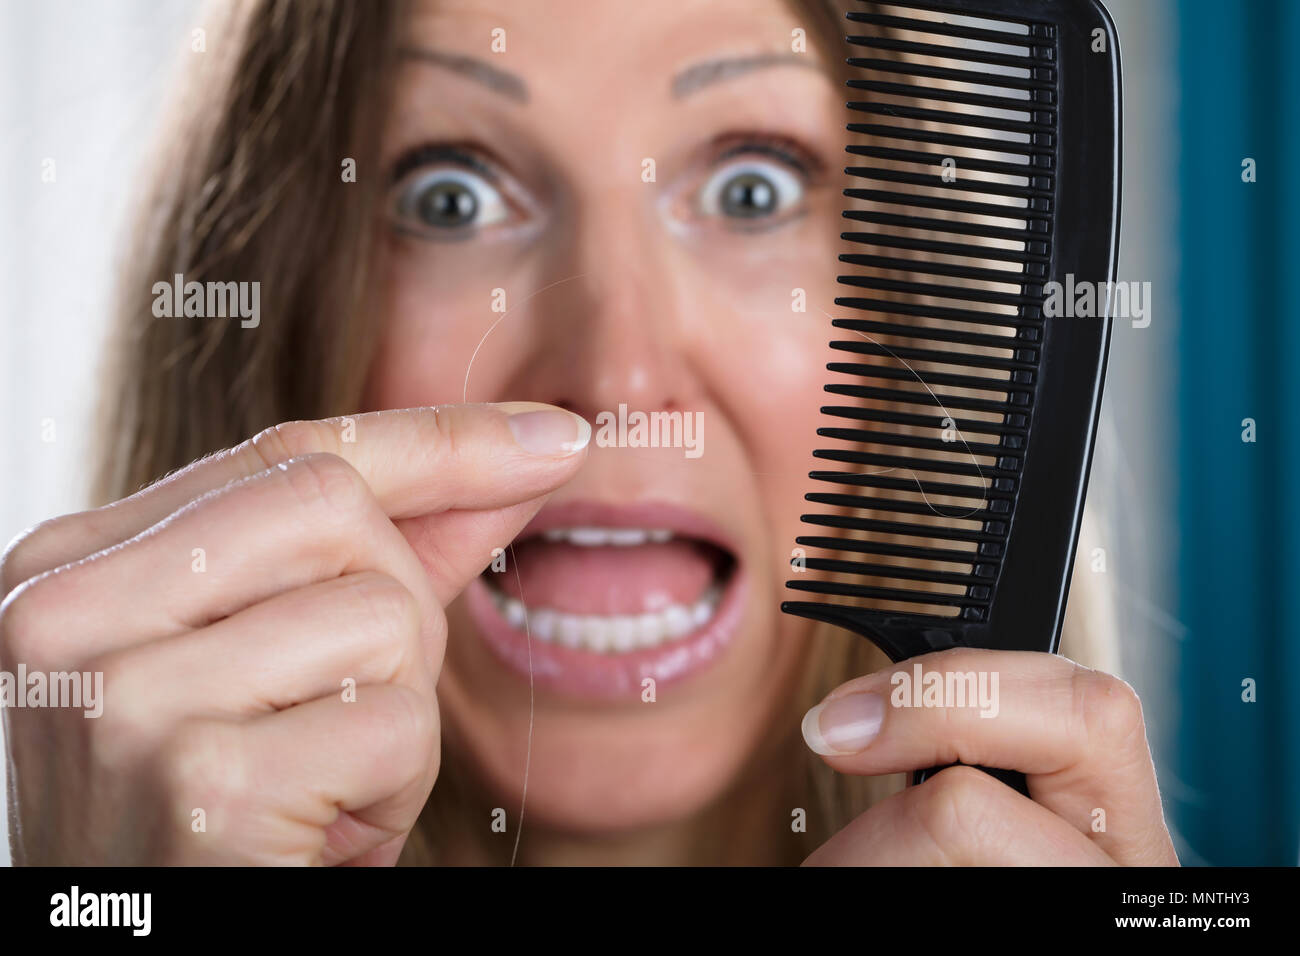 Shocked Woman Suffering From Hair Loss Problem Stock Photo